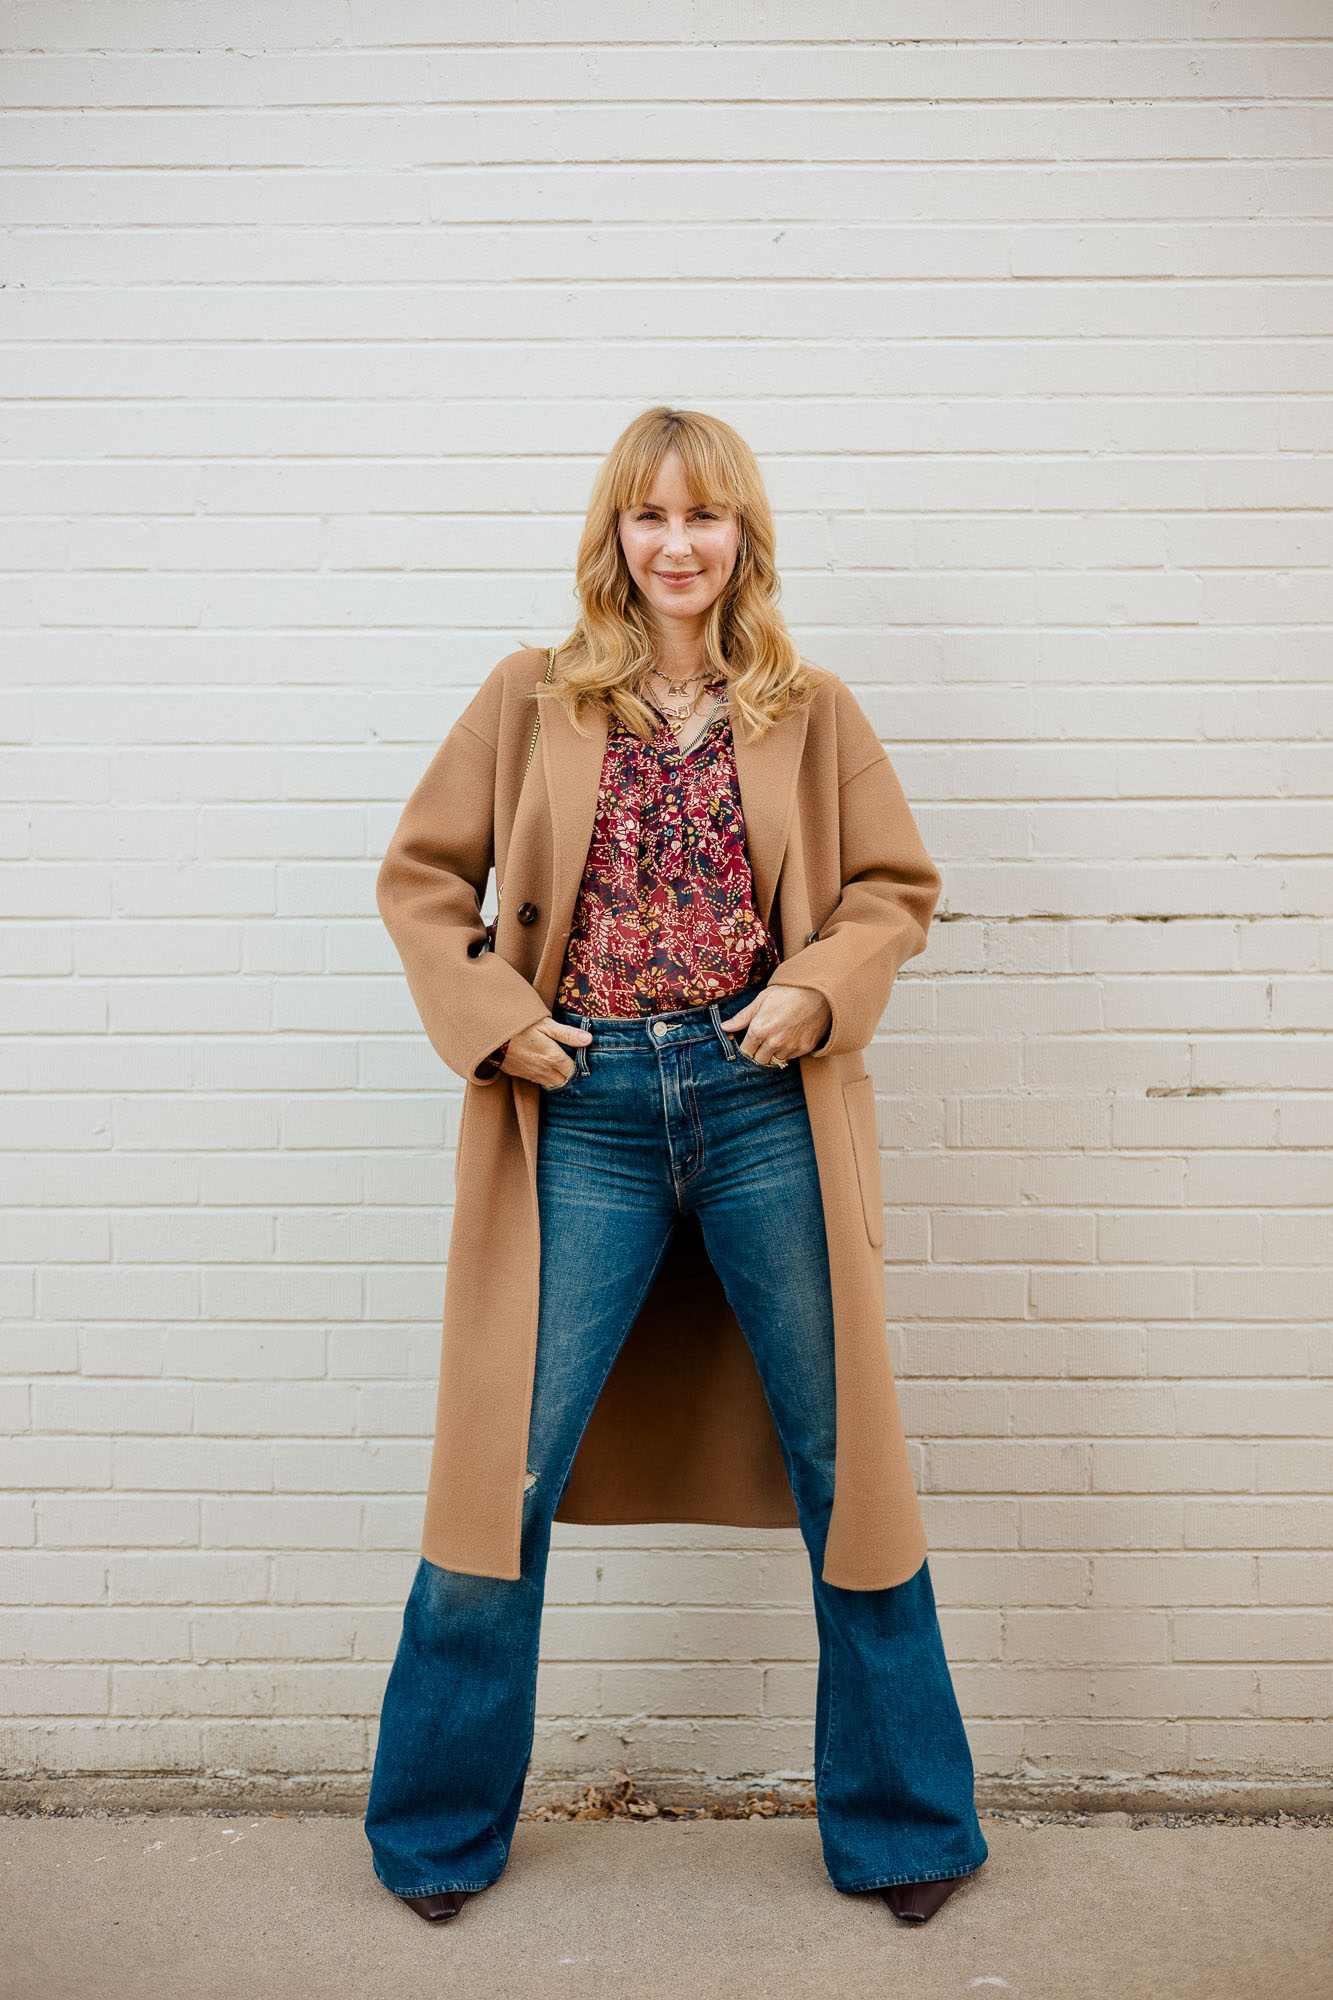 Wearing the Anine Bing Dylan camel coat with a BA&SH fall red print blouse and Mother flare jeans.